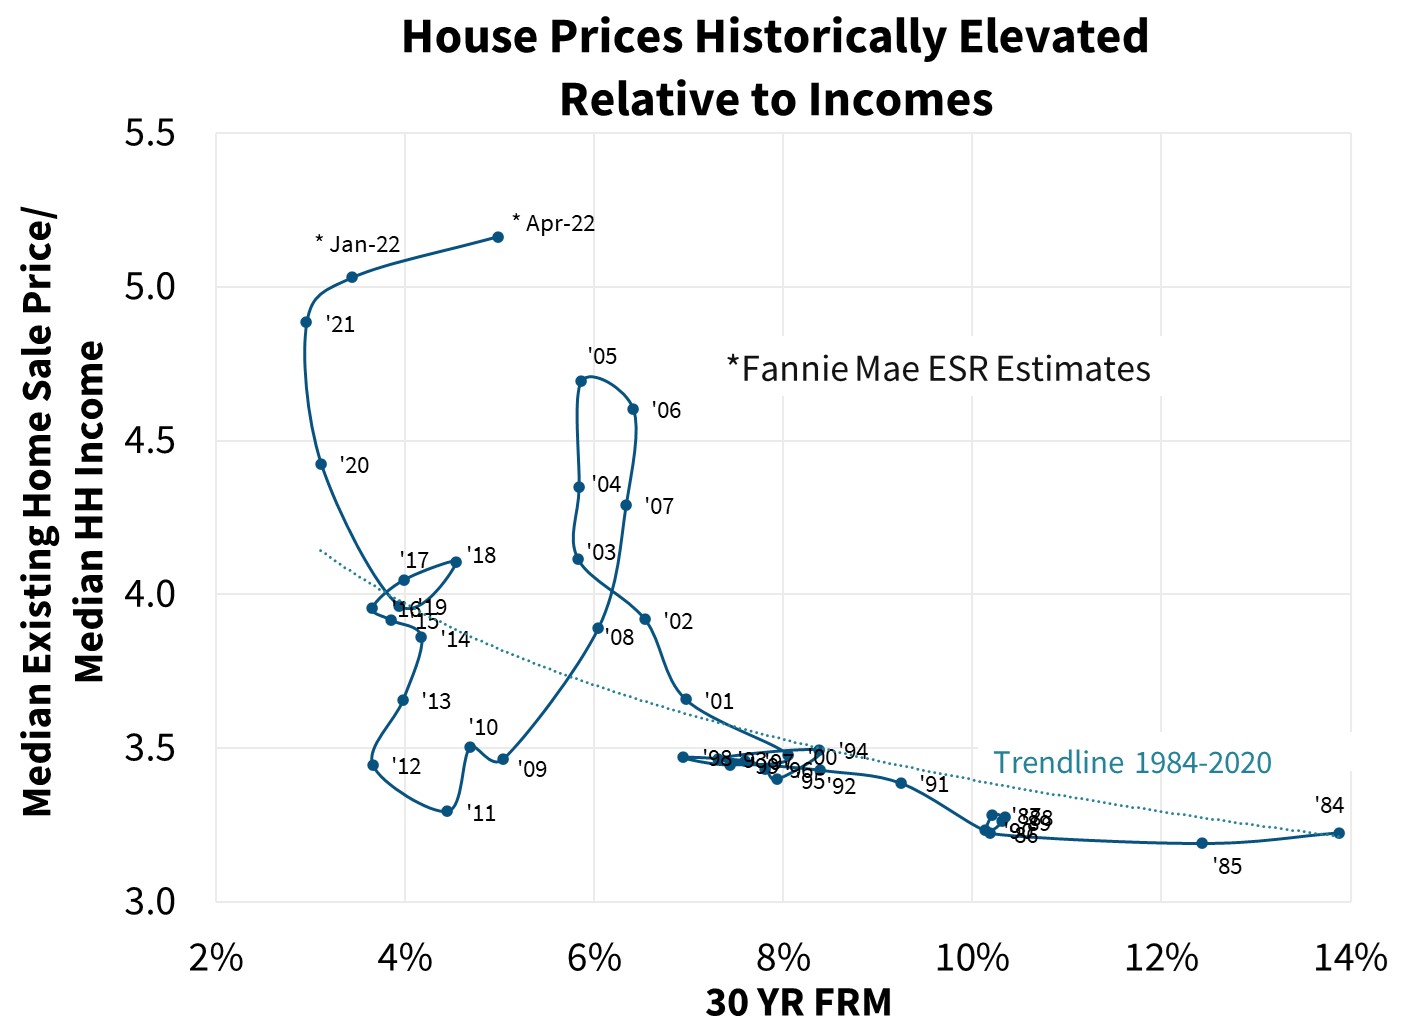  House Prices Historically Elevated Relative to Incomes